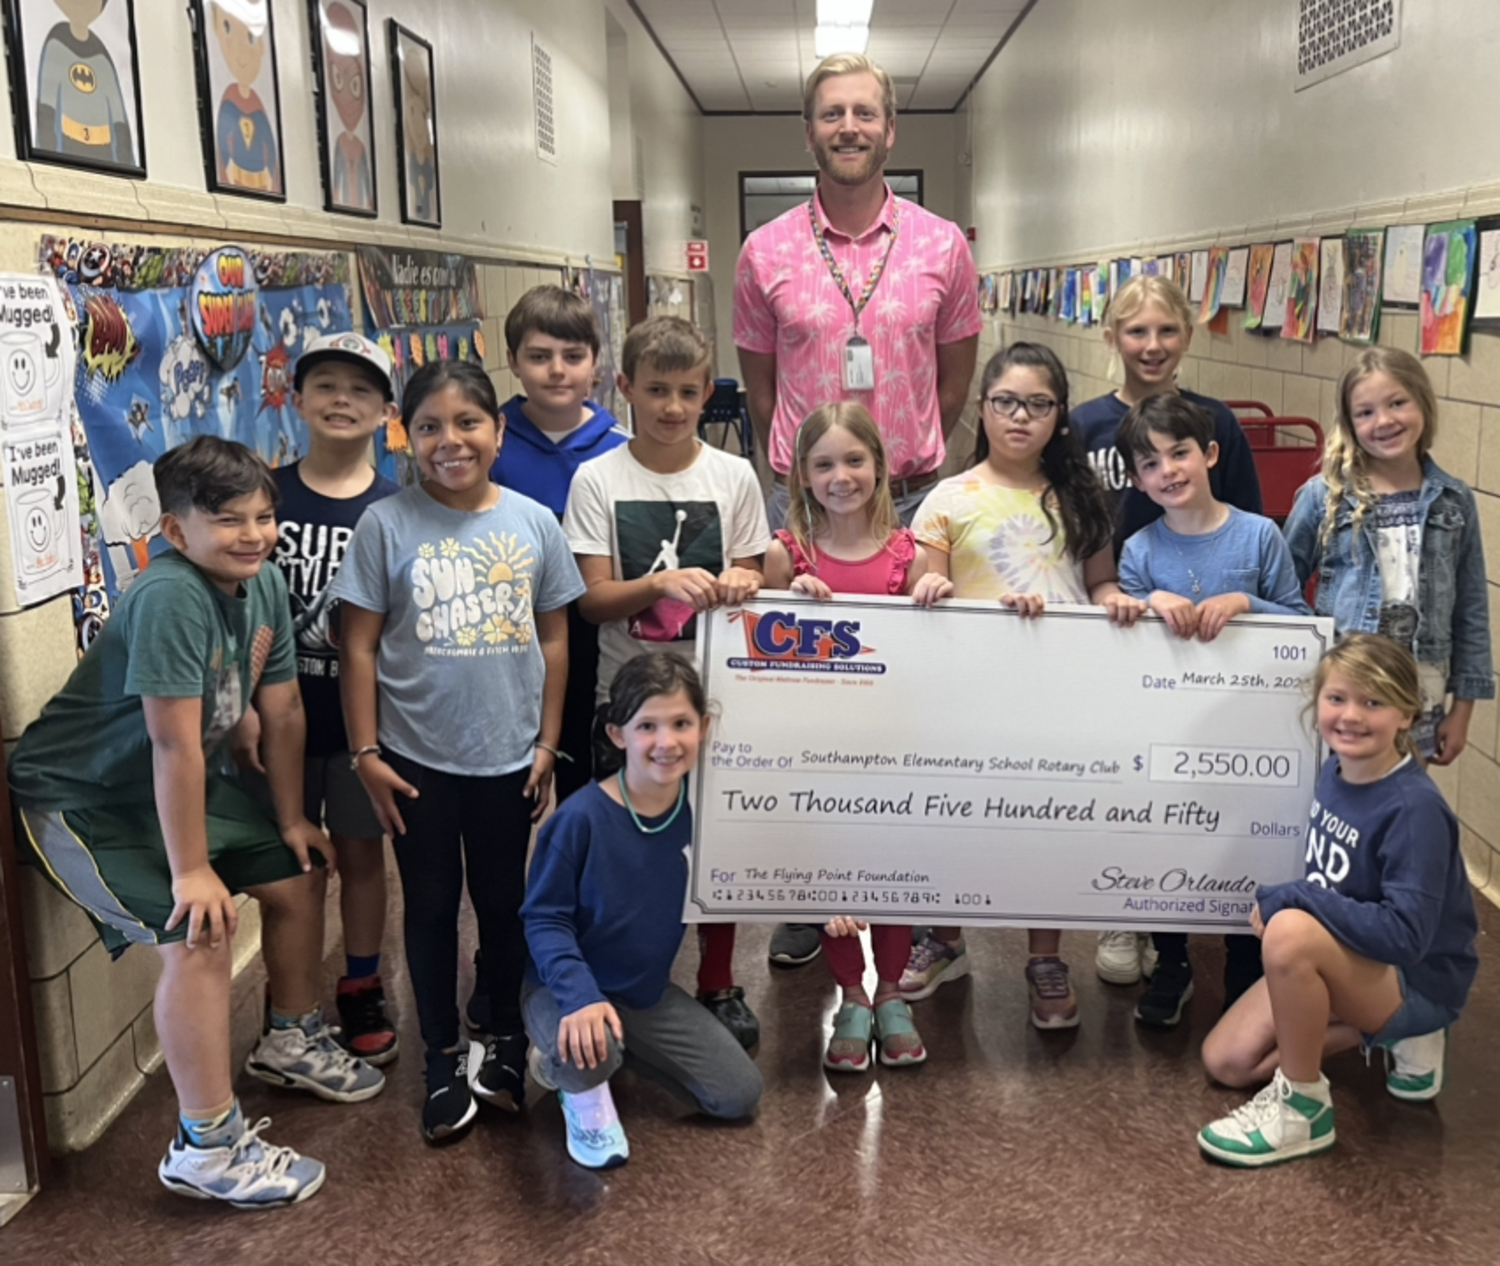 Students in Dr. Nick Epley’s Southampton Elementary School Rotary Club recently organized a fundraiser for the Flying Point Foundation for Autism, in which they sold mattresses, with help from a company that organizes them, and manned a bake sale. The event raised a combined $3,000.  COURTESY NICK EPLEY